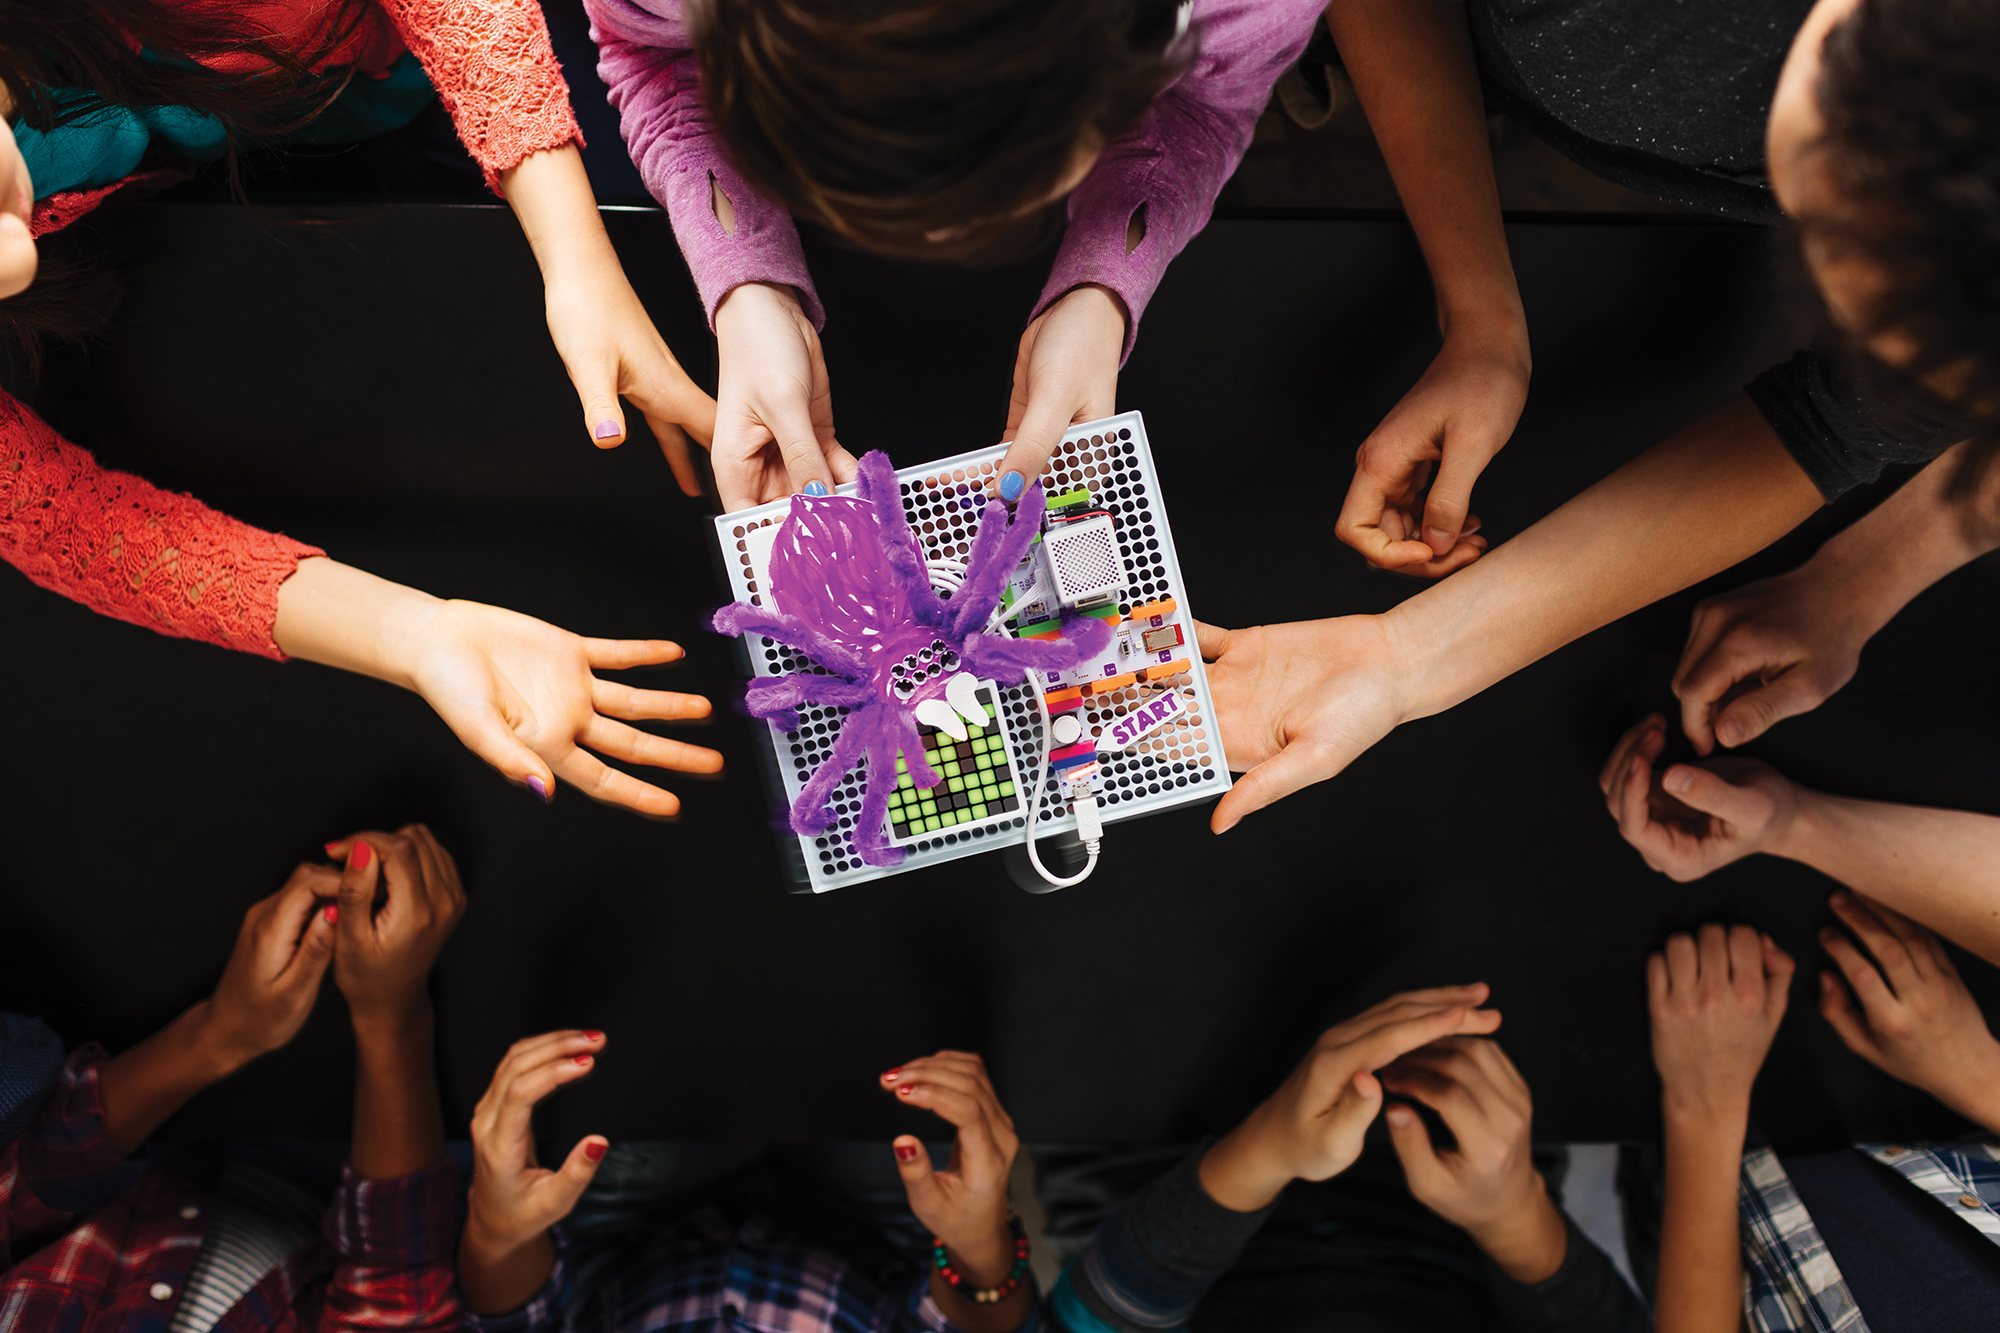 Hands-on Coding and STEAM Workshop with littleBits